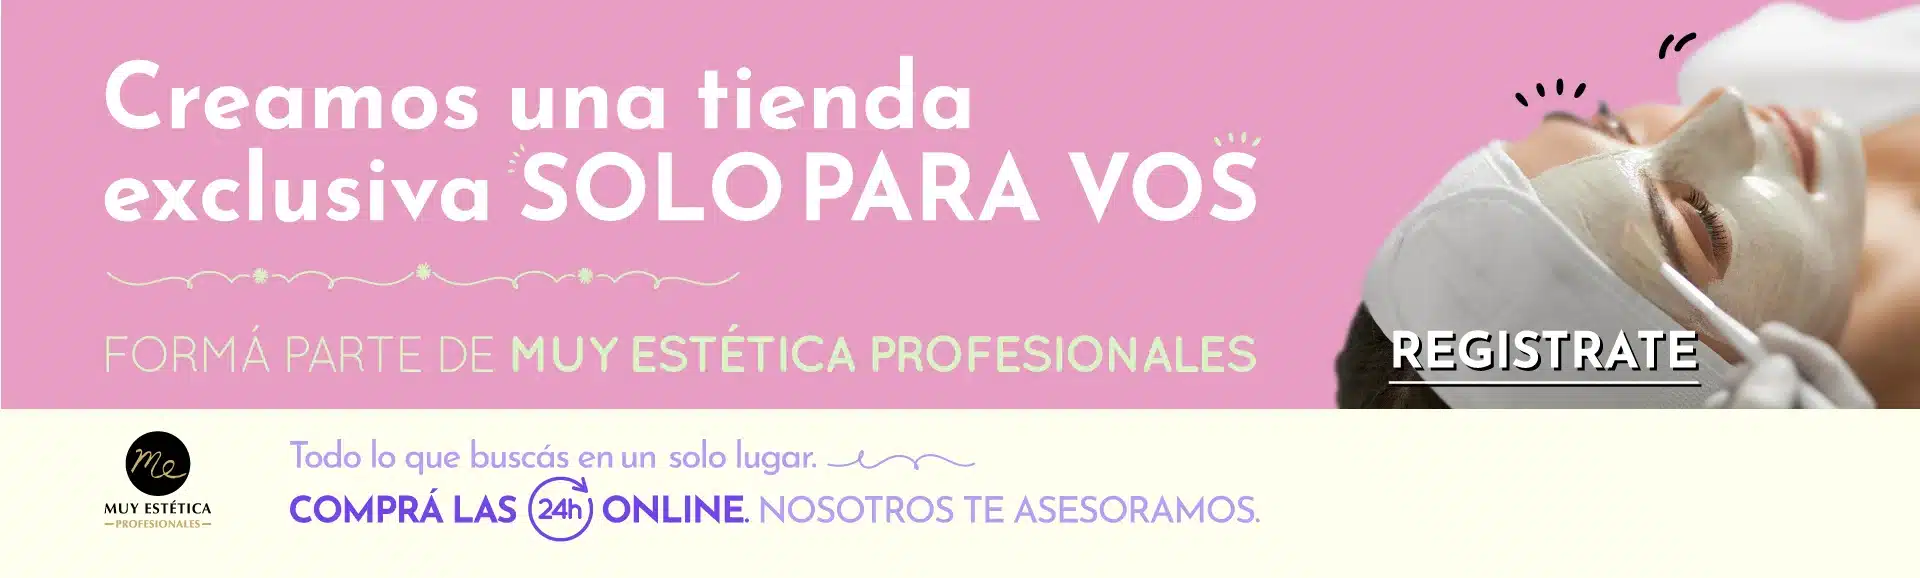 22-11-11-BANNERS-MUY-ESTETICA-profesionales-2-1-1